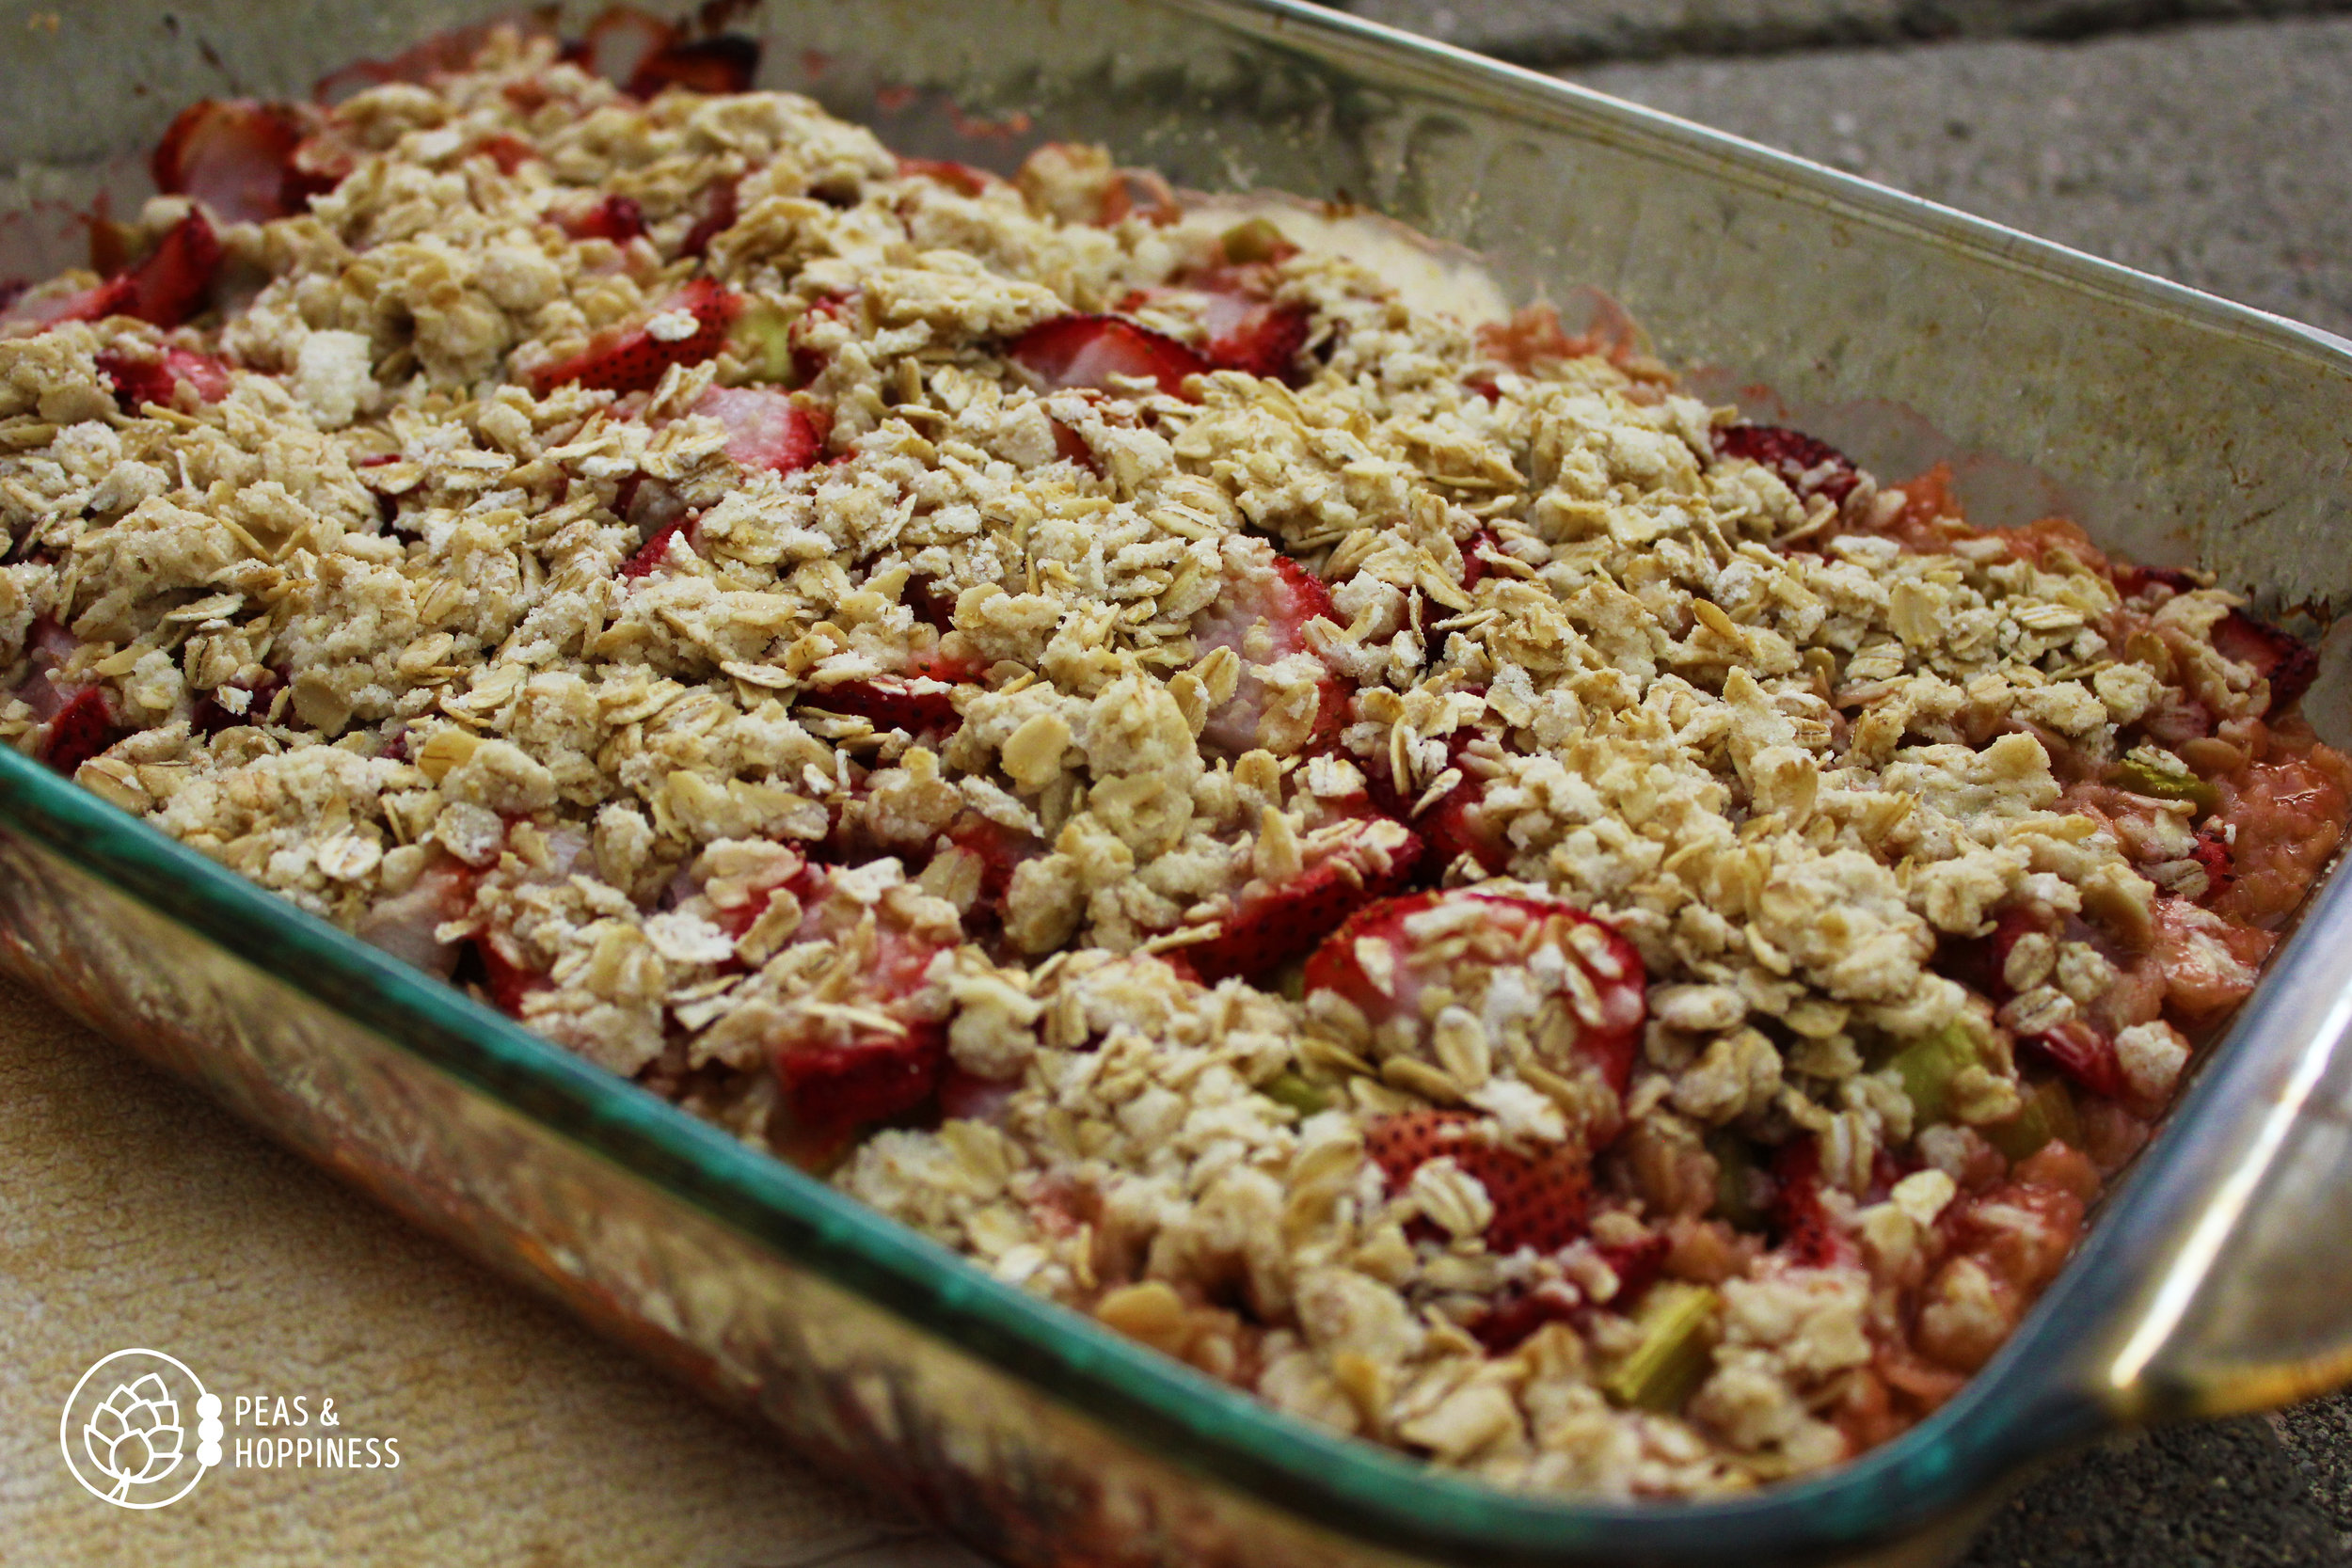 Strawberry Rhubarb Crisp. Not going to lie - I've definitely eaten this for breakfast. It has fruit AND oats! Get the recipe